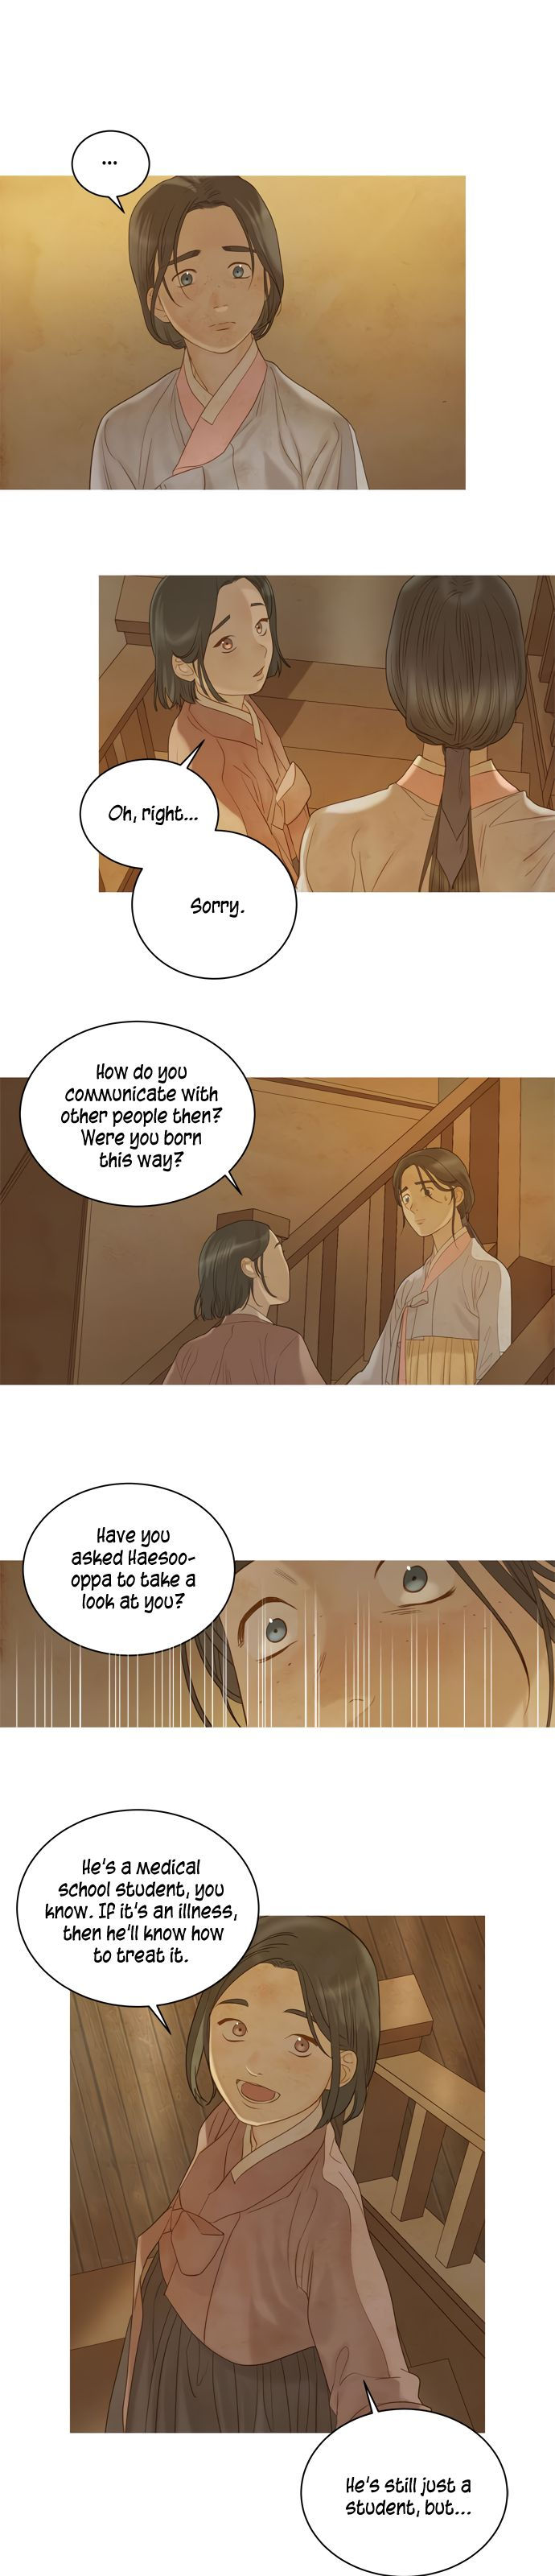 Gorae Byul - The Gyeongseong Mermaid - Chapter 20 Page 12